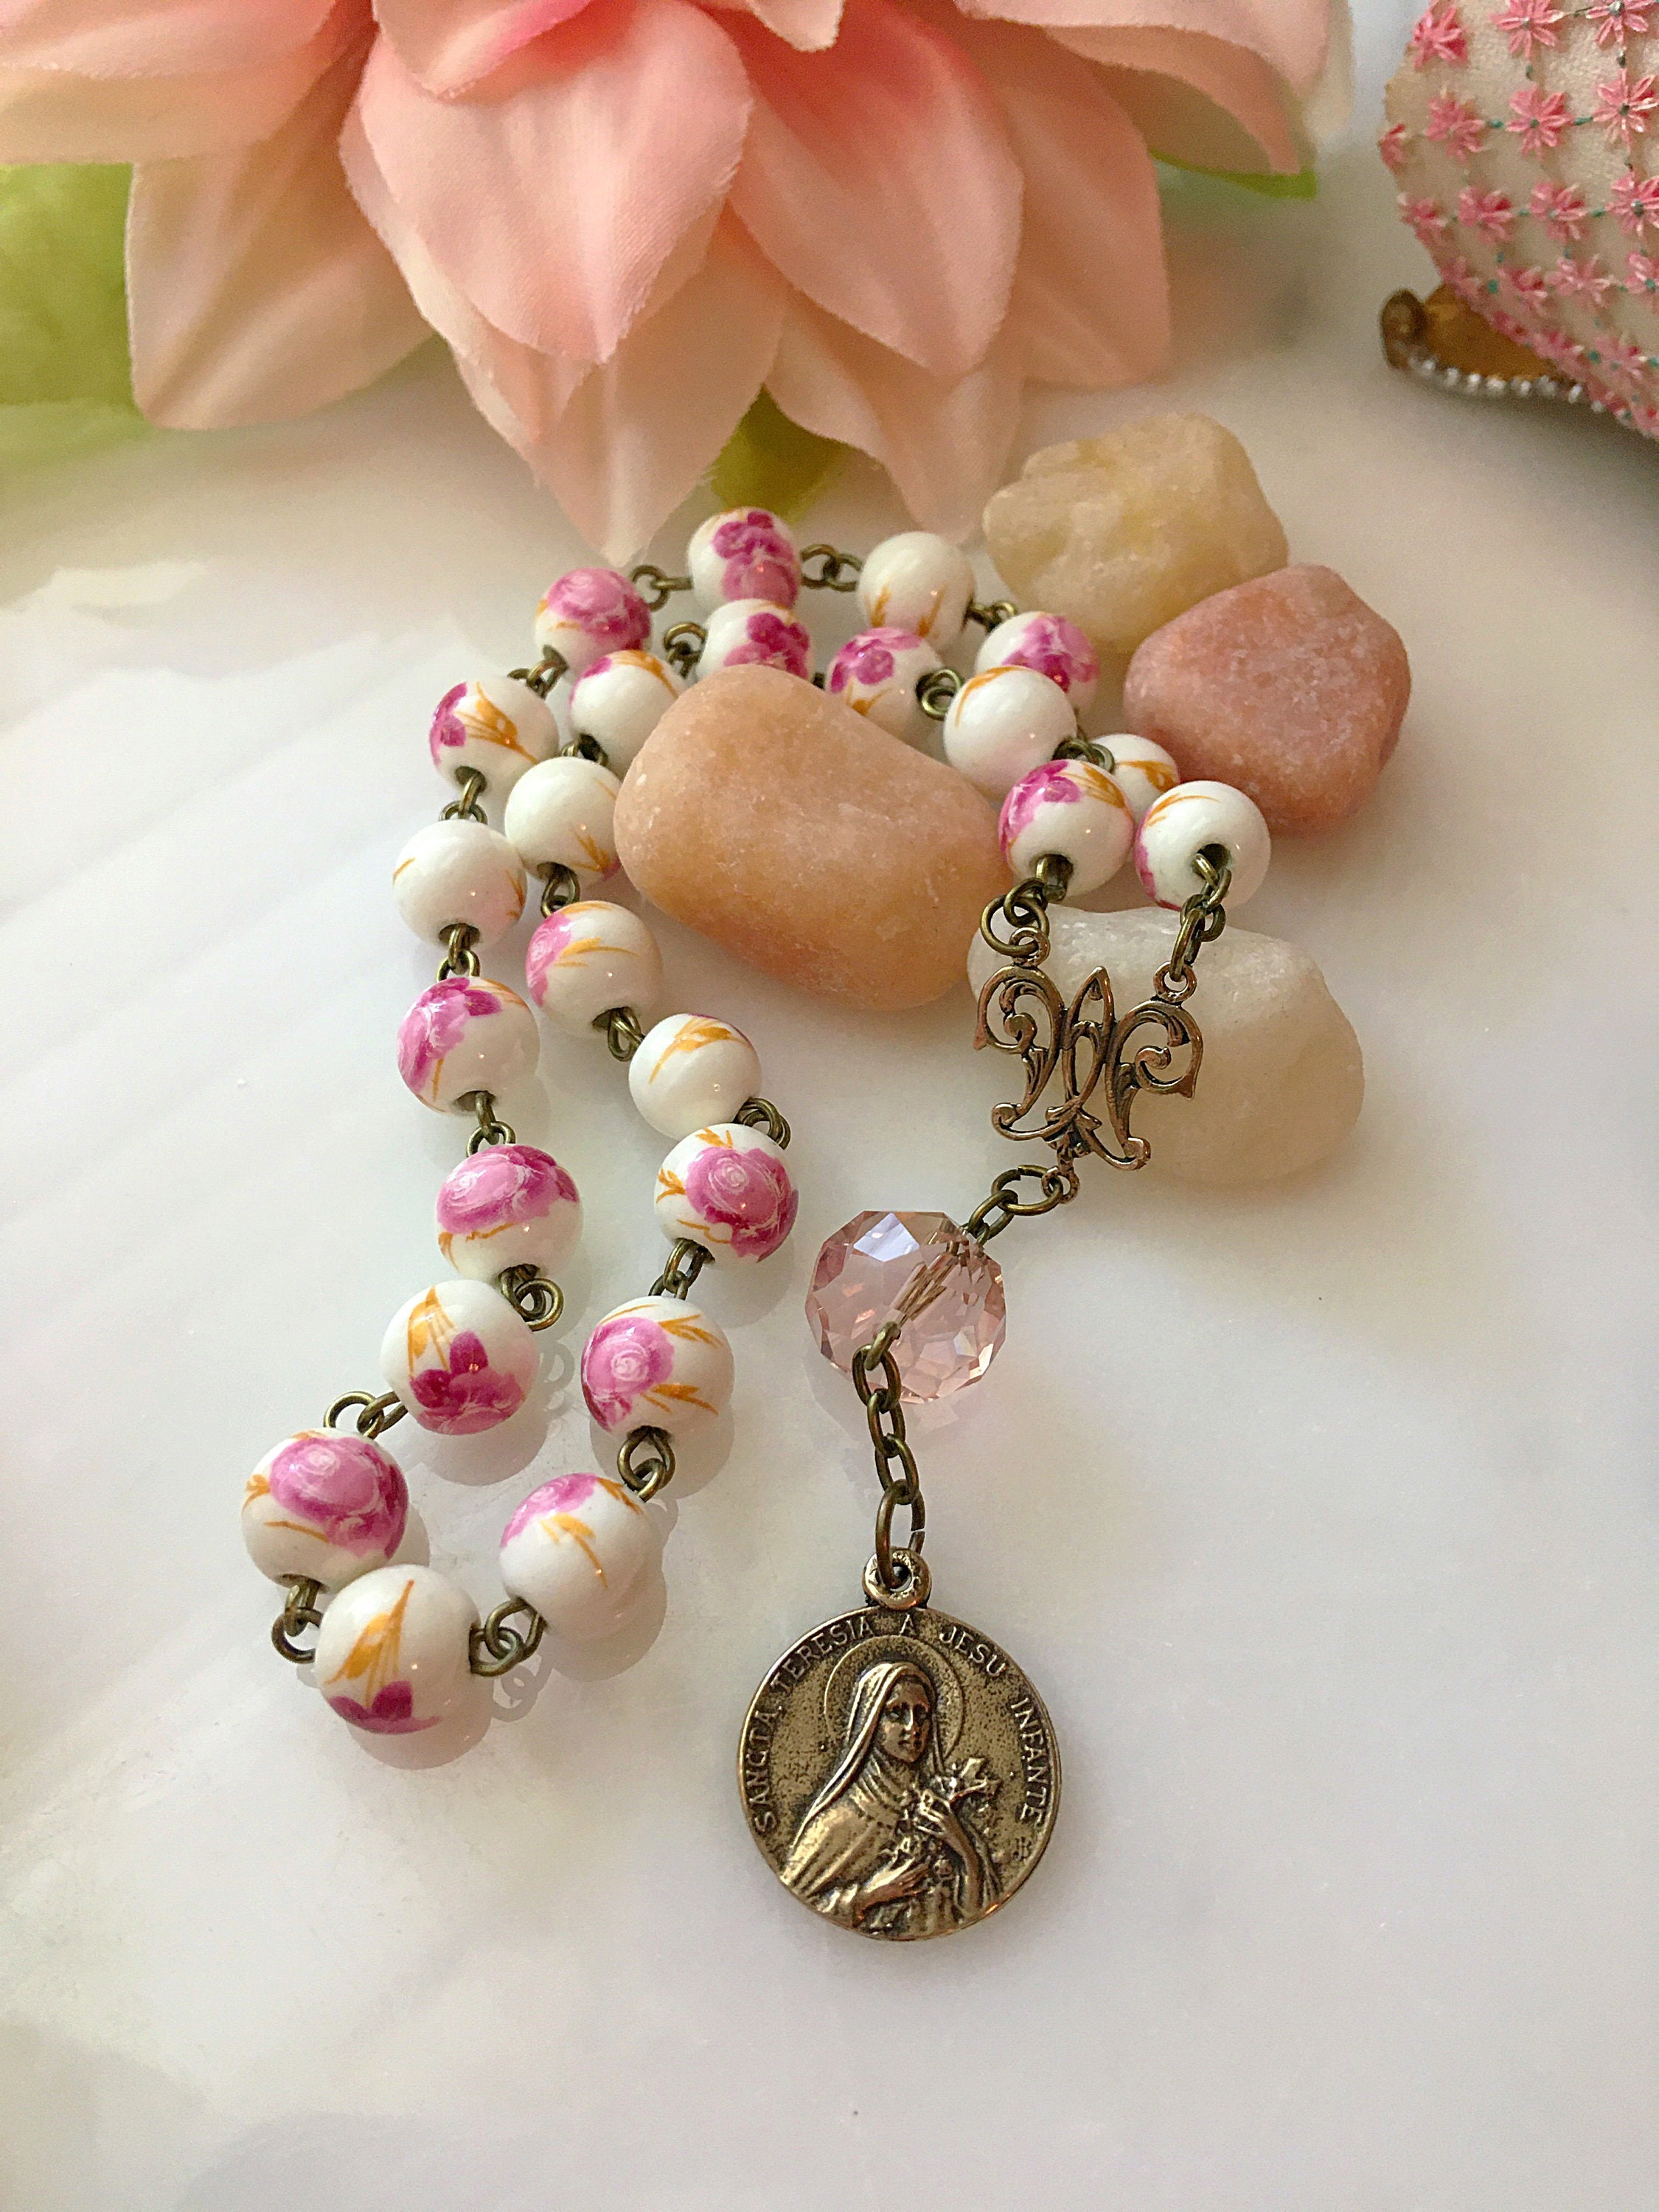 Pink Rose Kids Beads Necklace Set With Beads, Flowers, Charms